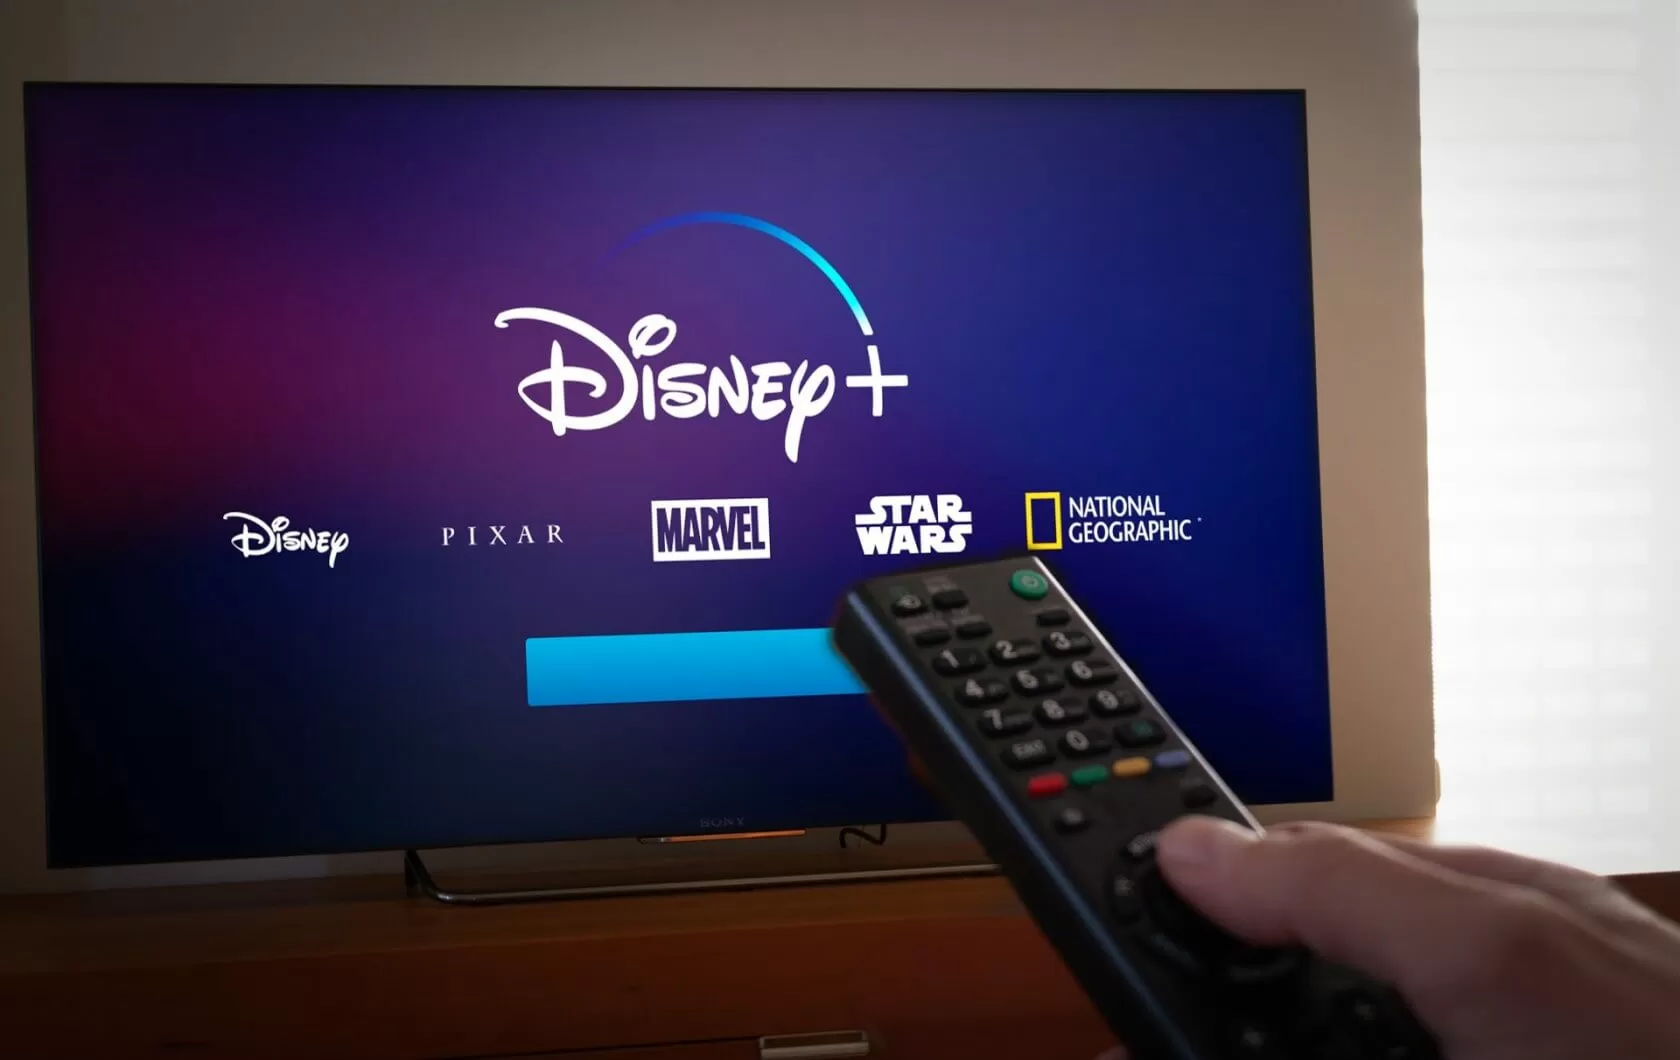 Disney+'s Fire TV availability is reportedly in question due to an advertising dispute with Amazon